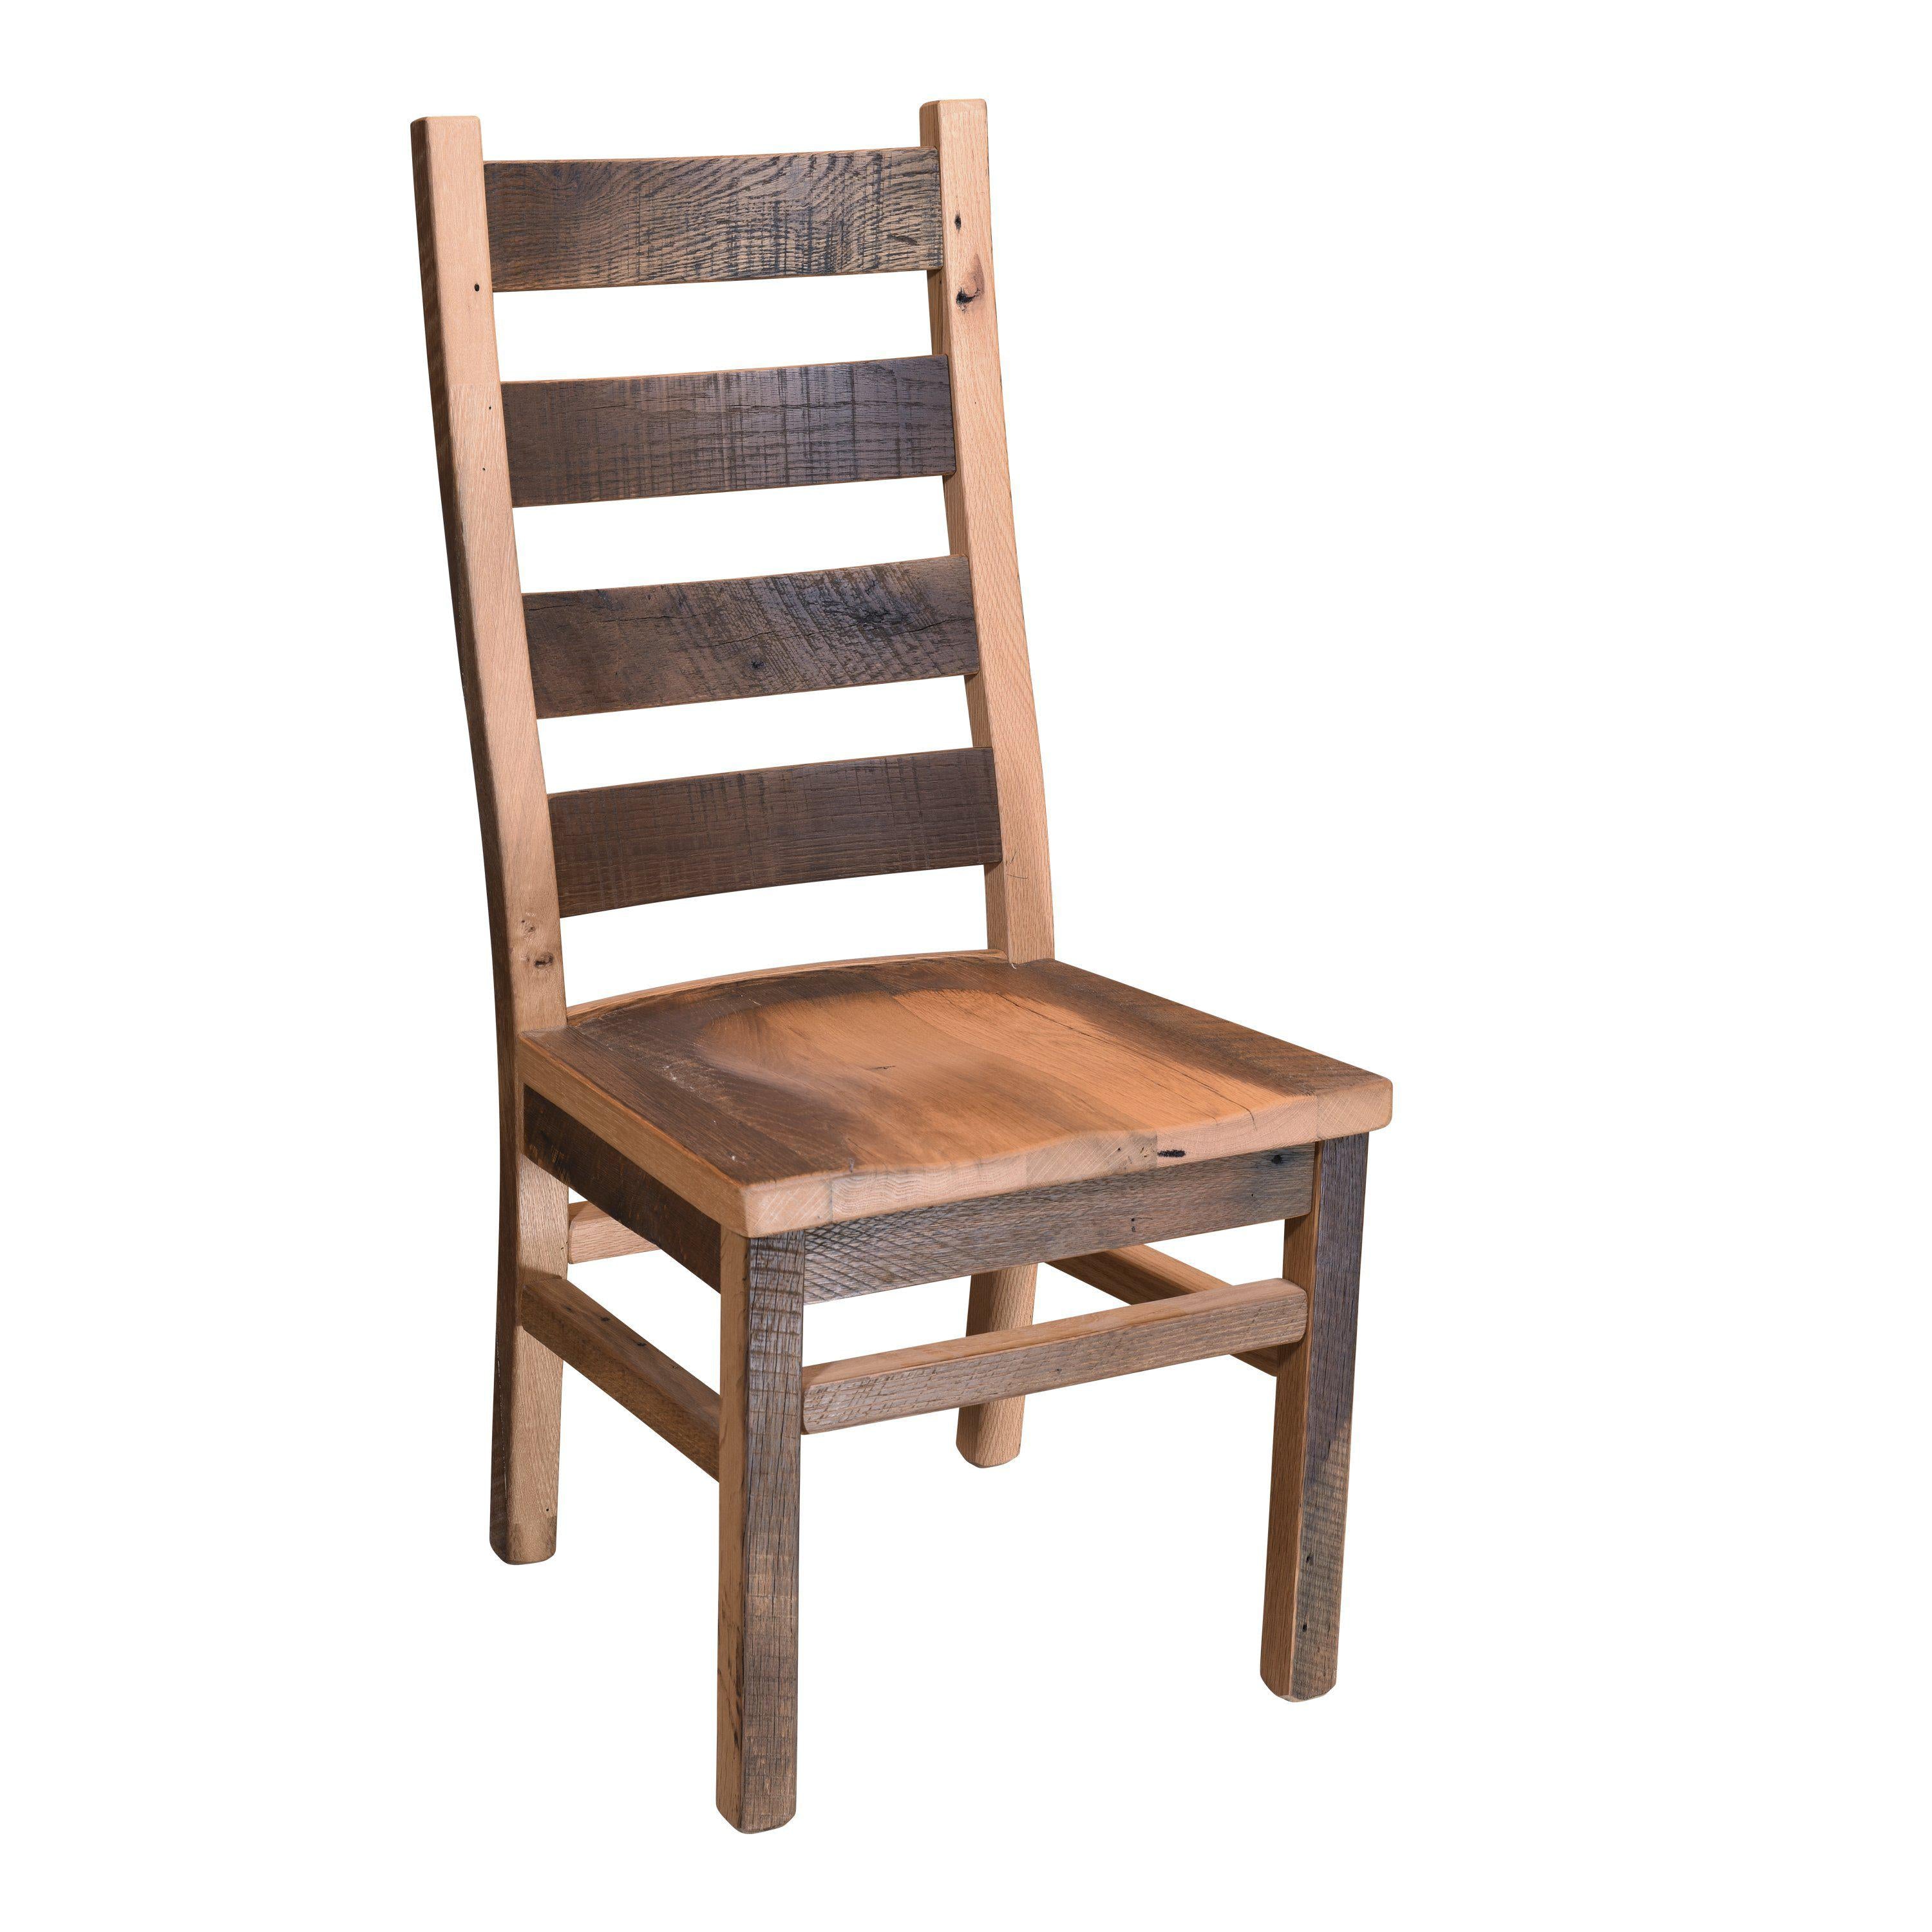 Amish Galloway Shaker Ladder Back Chair